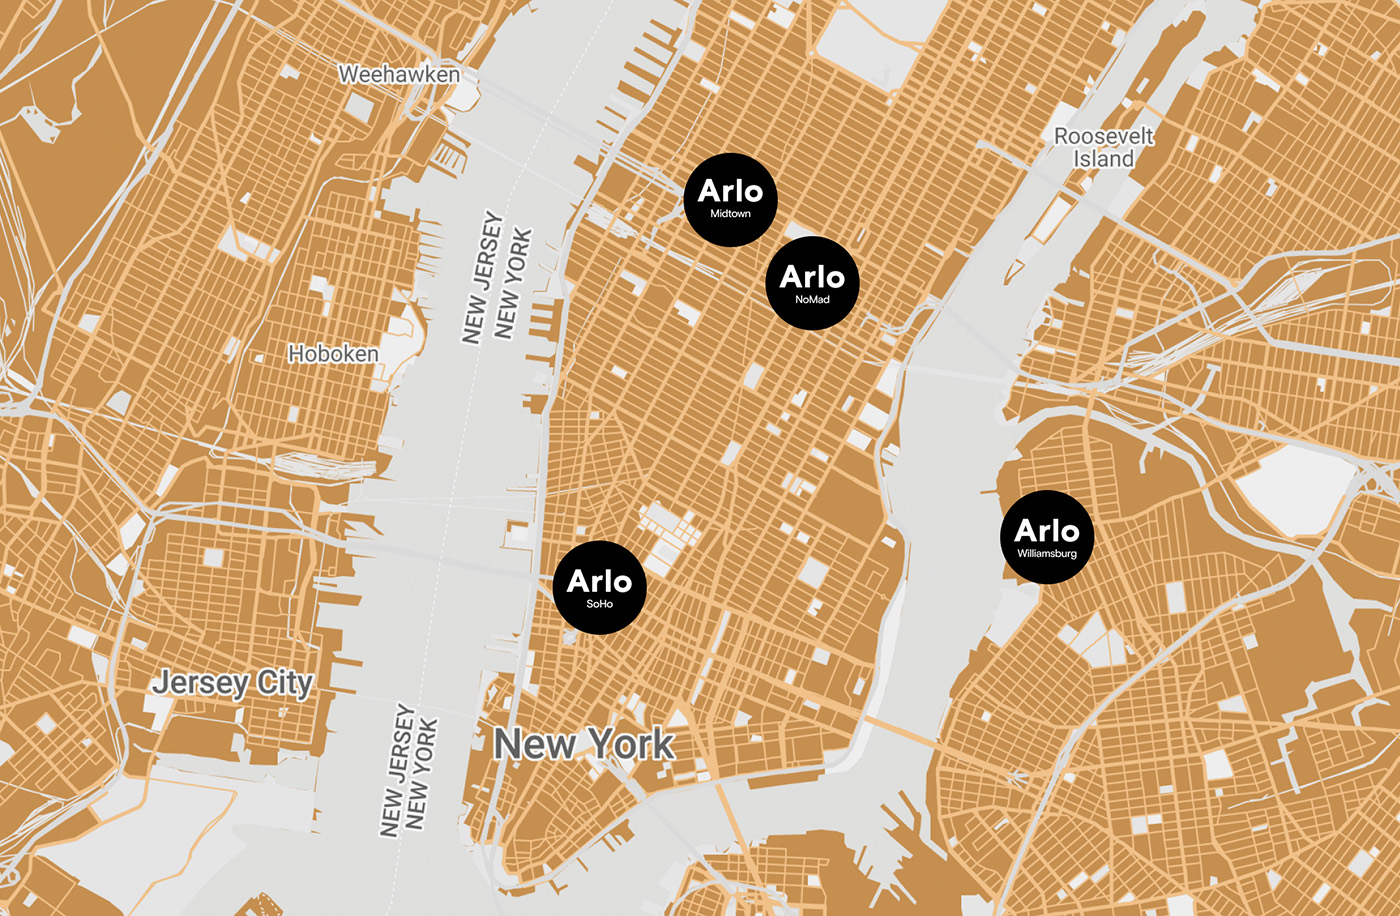 Map of New York City showing locations of four Arlo hotels in Midtown, NoMad, SoHo, and Williamsburg areas. Nearby areas like Jersey City, Weehawken, and Hoboken are also marked.